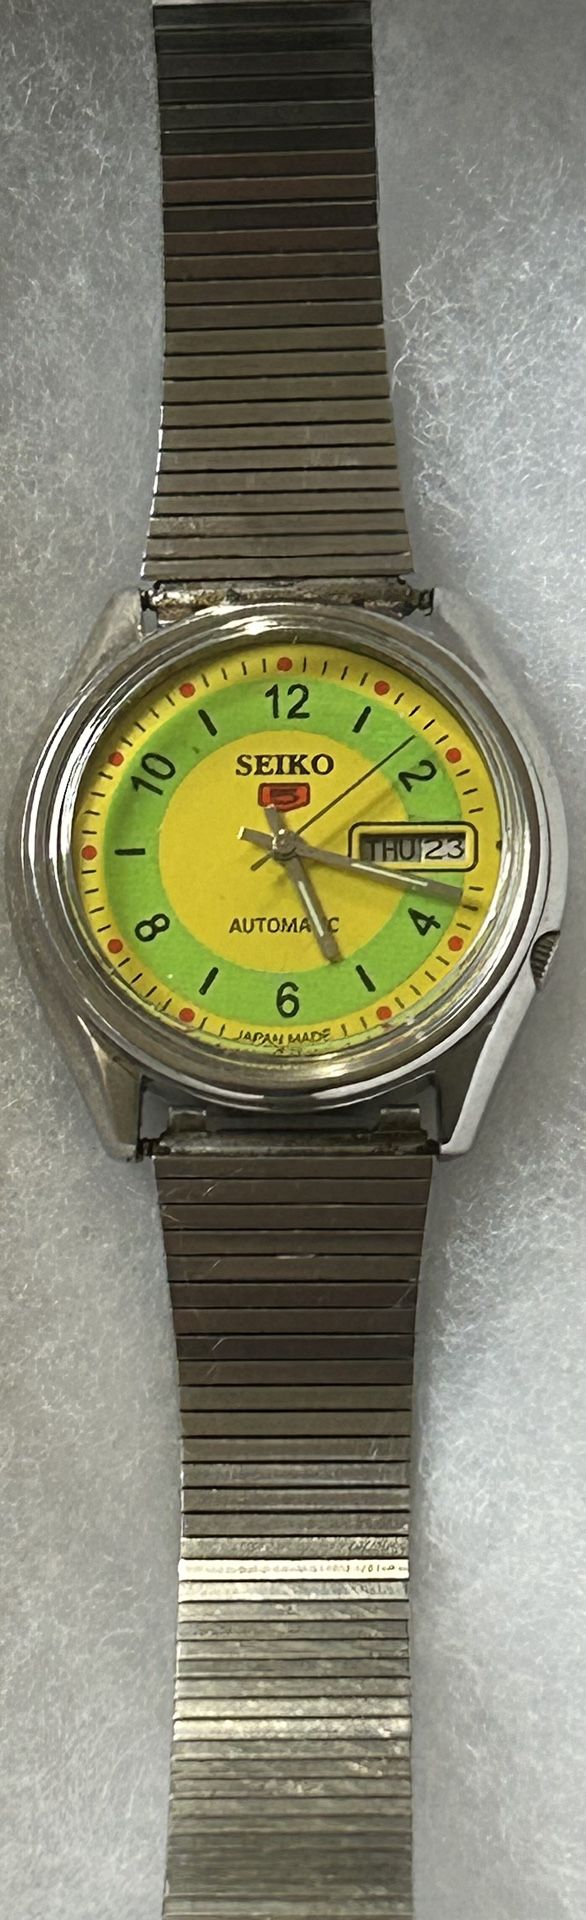 Seiko 5 Automatic With Vintage Metal Band